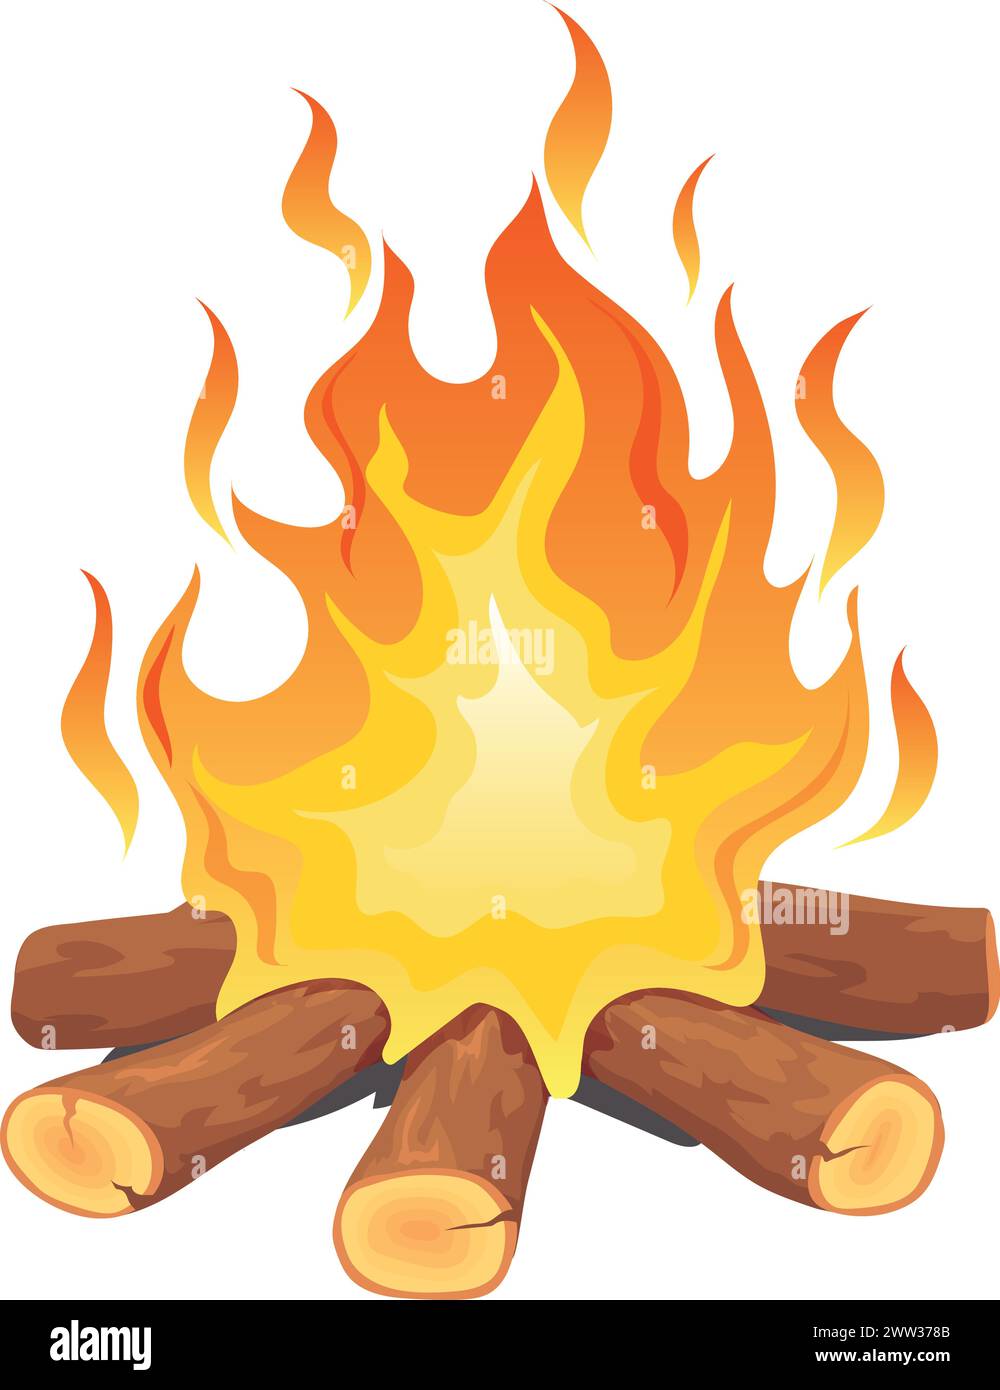 Campfire flame. Cartoon bonfire with wooden firewood logs isolated on white background Stock Vector